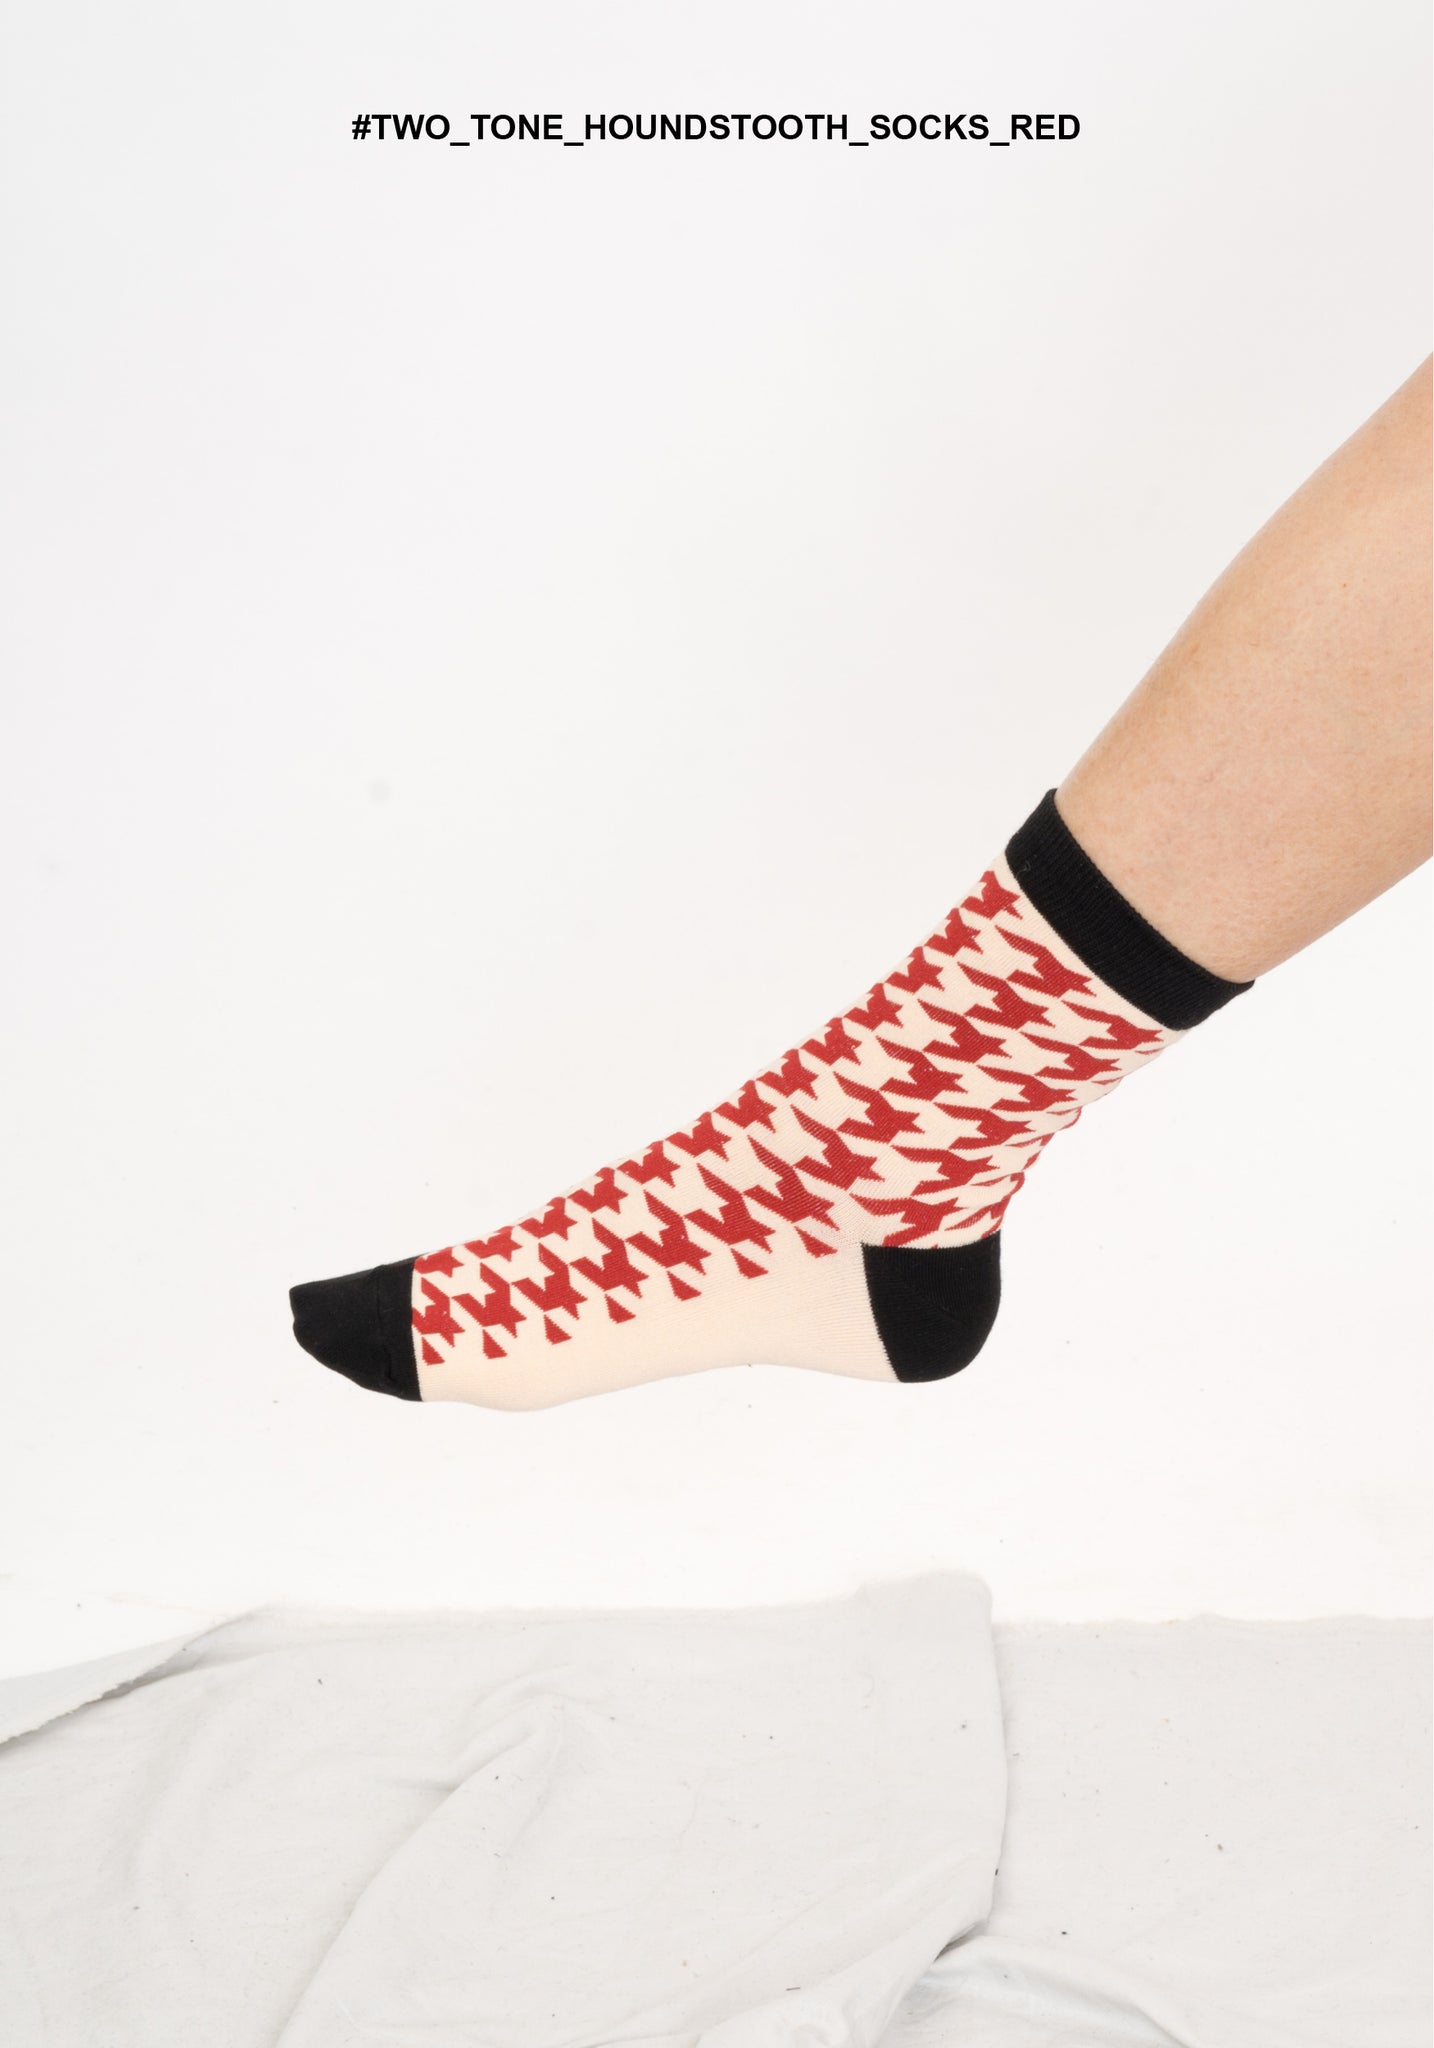 Two Tone Houndstooth Socks Red - whoami